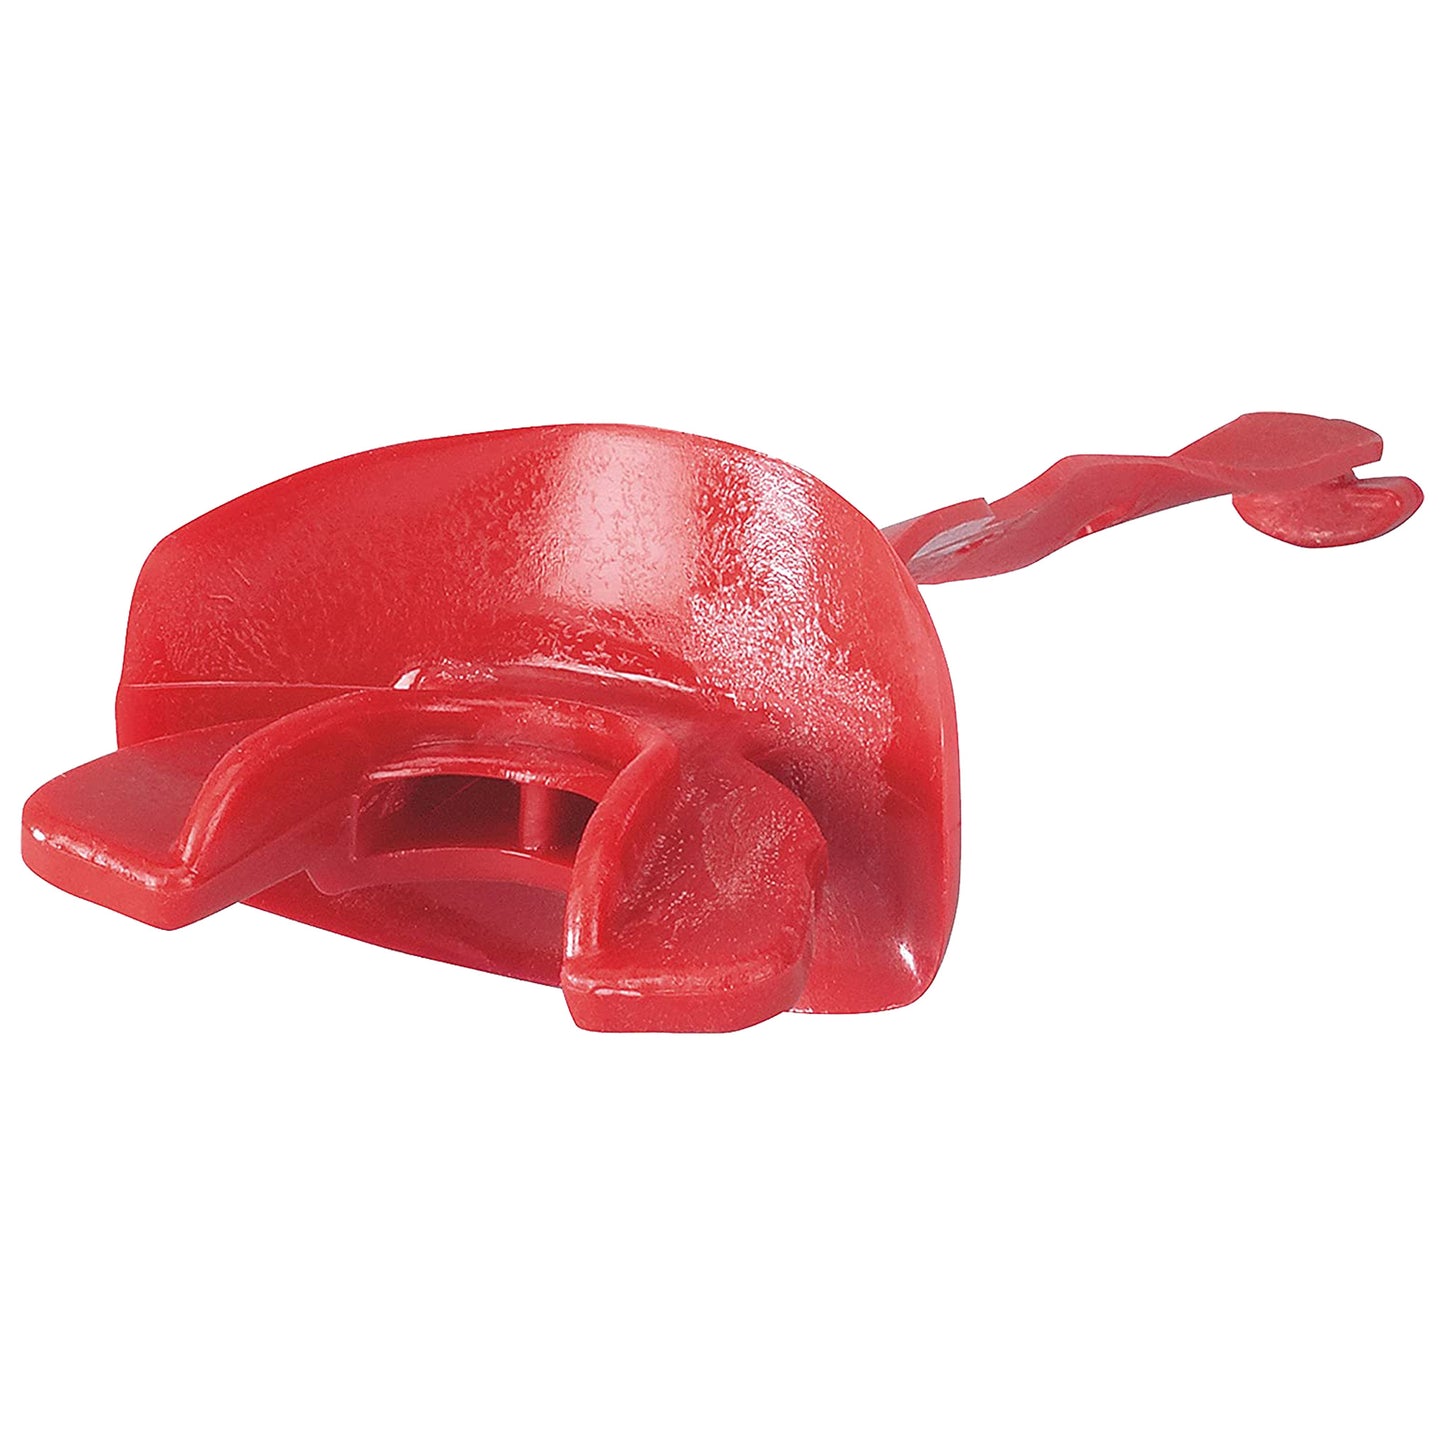 Vettex Doublegaurd Mouthguard with Lip Protector - Red